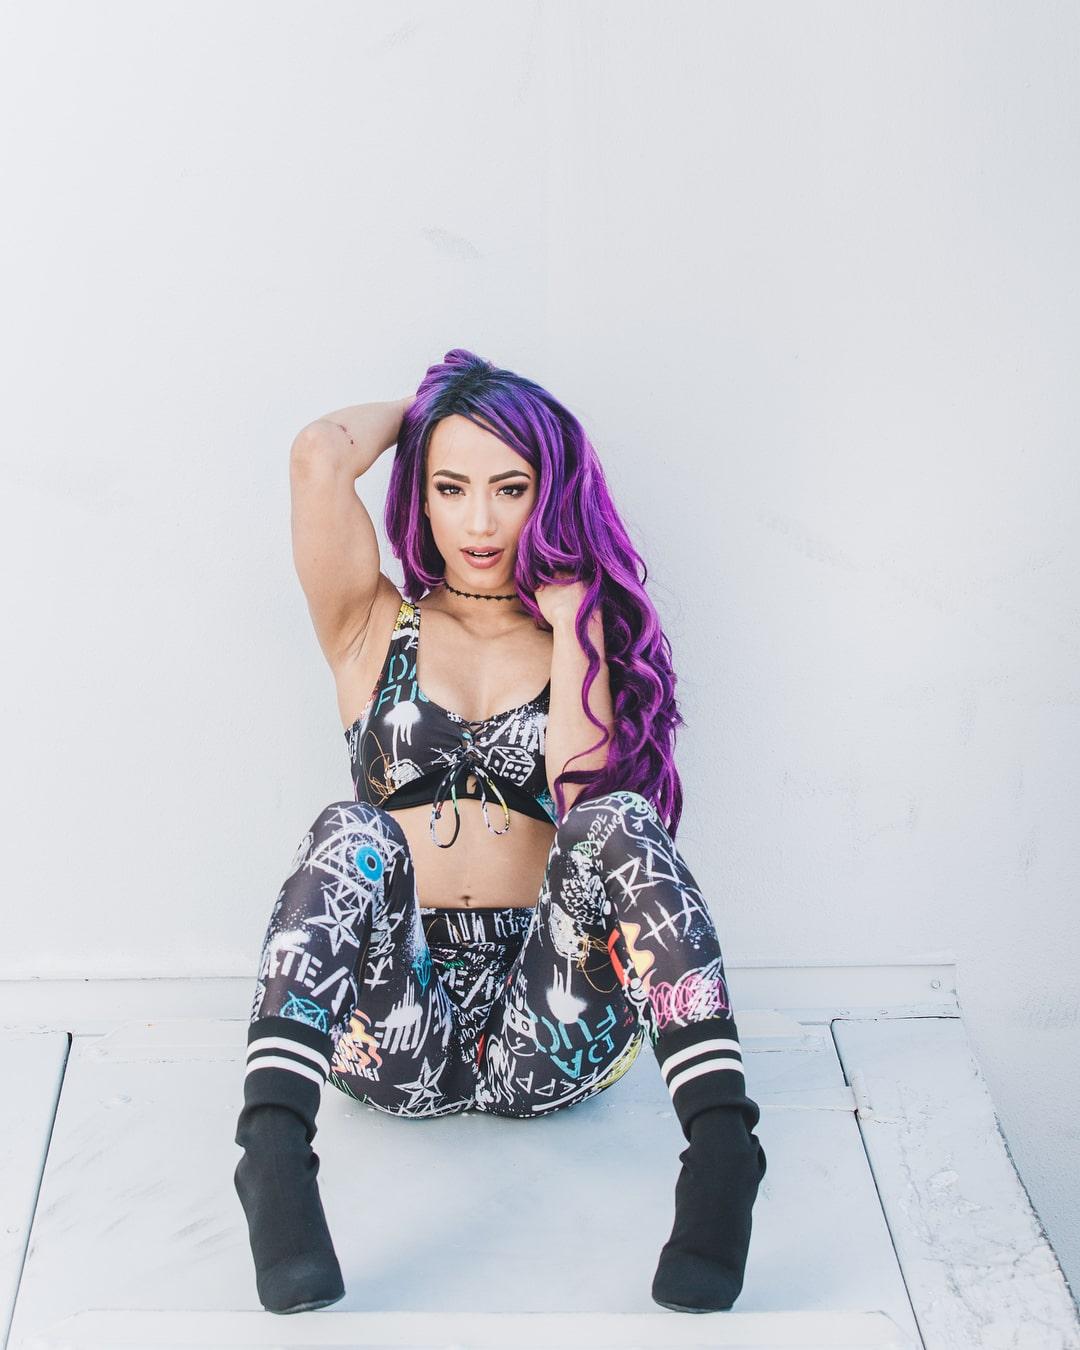 36 Nude Pictures Of Sasha Banks Will Cause You To Ache For Her | Best Of Comic Books